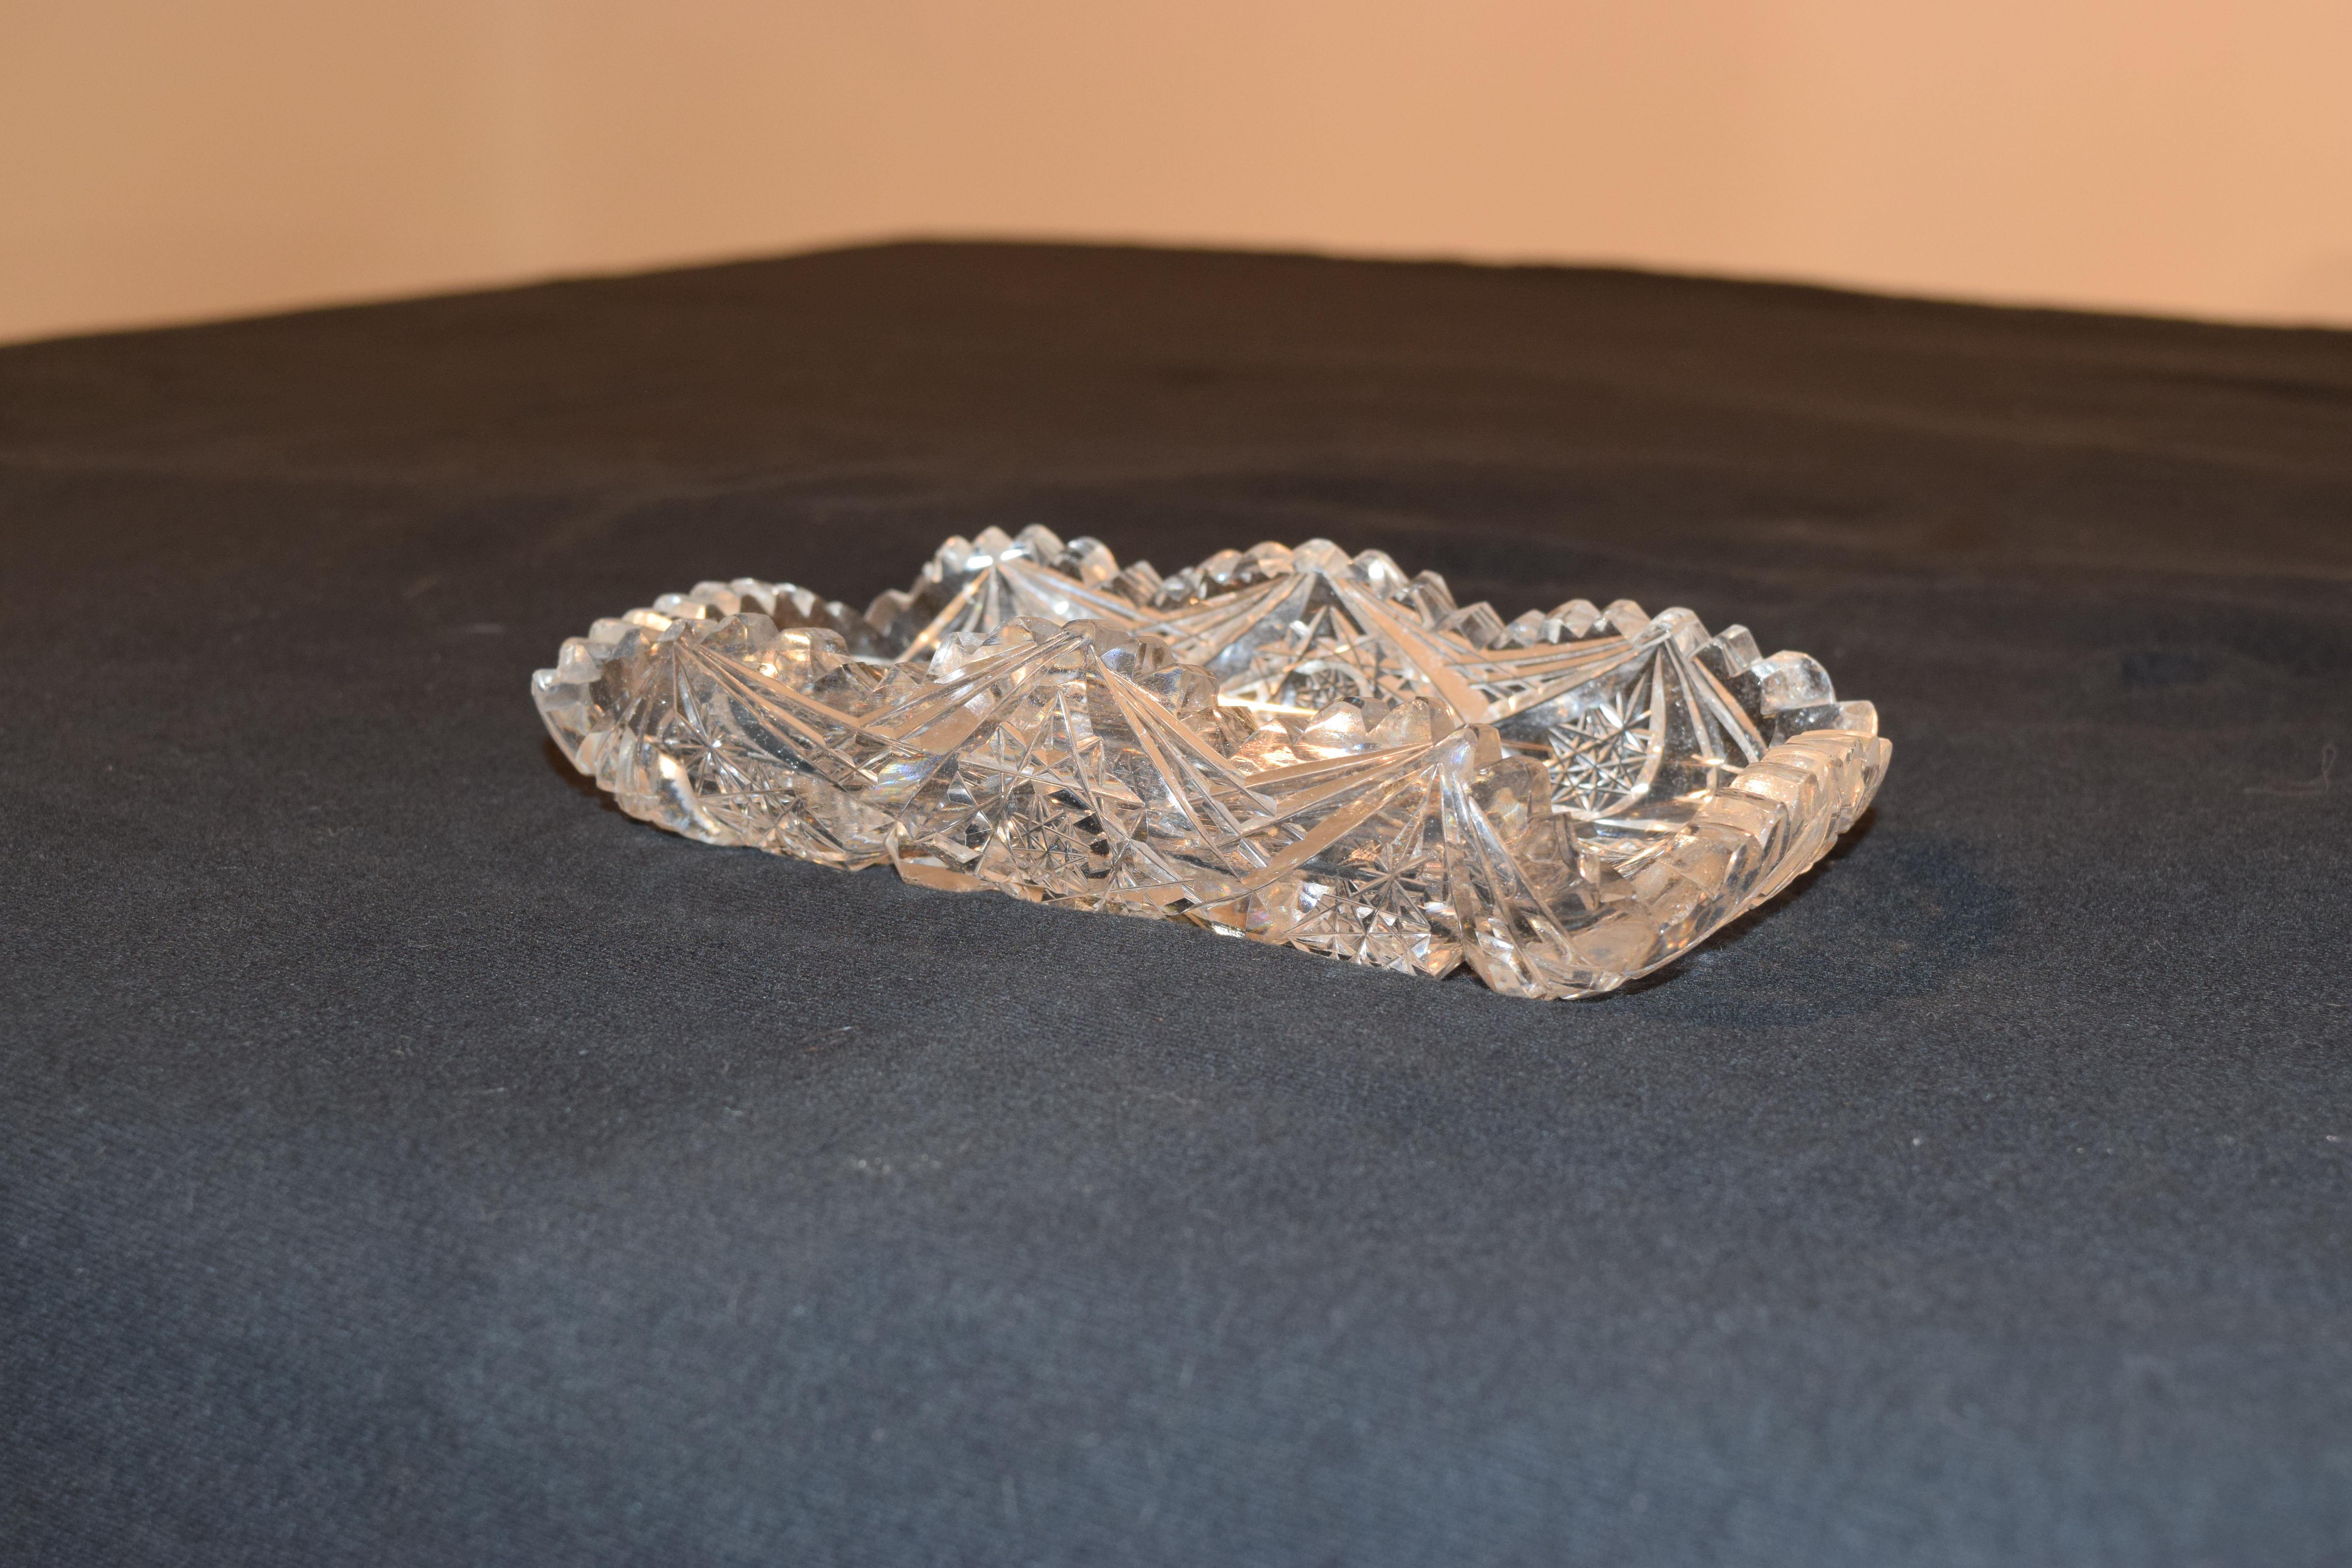 This is a gorgeous piece of American Brilliant Glass by J. Hoare. The bowl features a beautiful pattern of hobstar and cane detailing, all intersecting at the very center, as well as a sawtooth, scalloped rim. The crystal is stunning. The deep